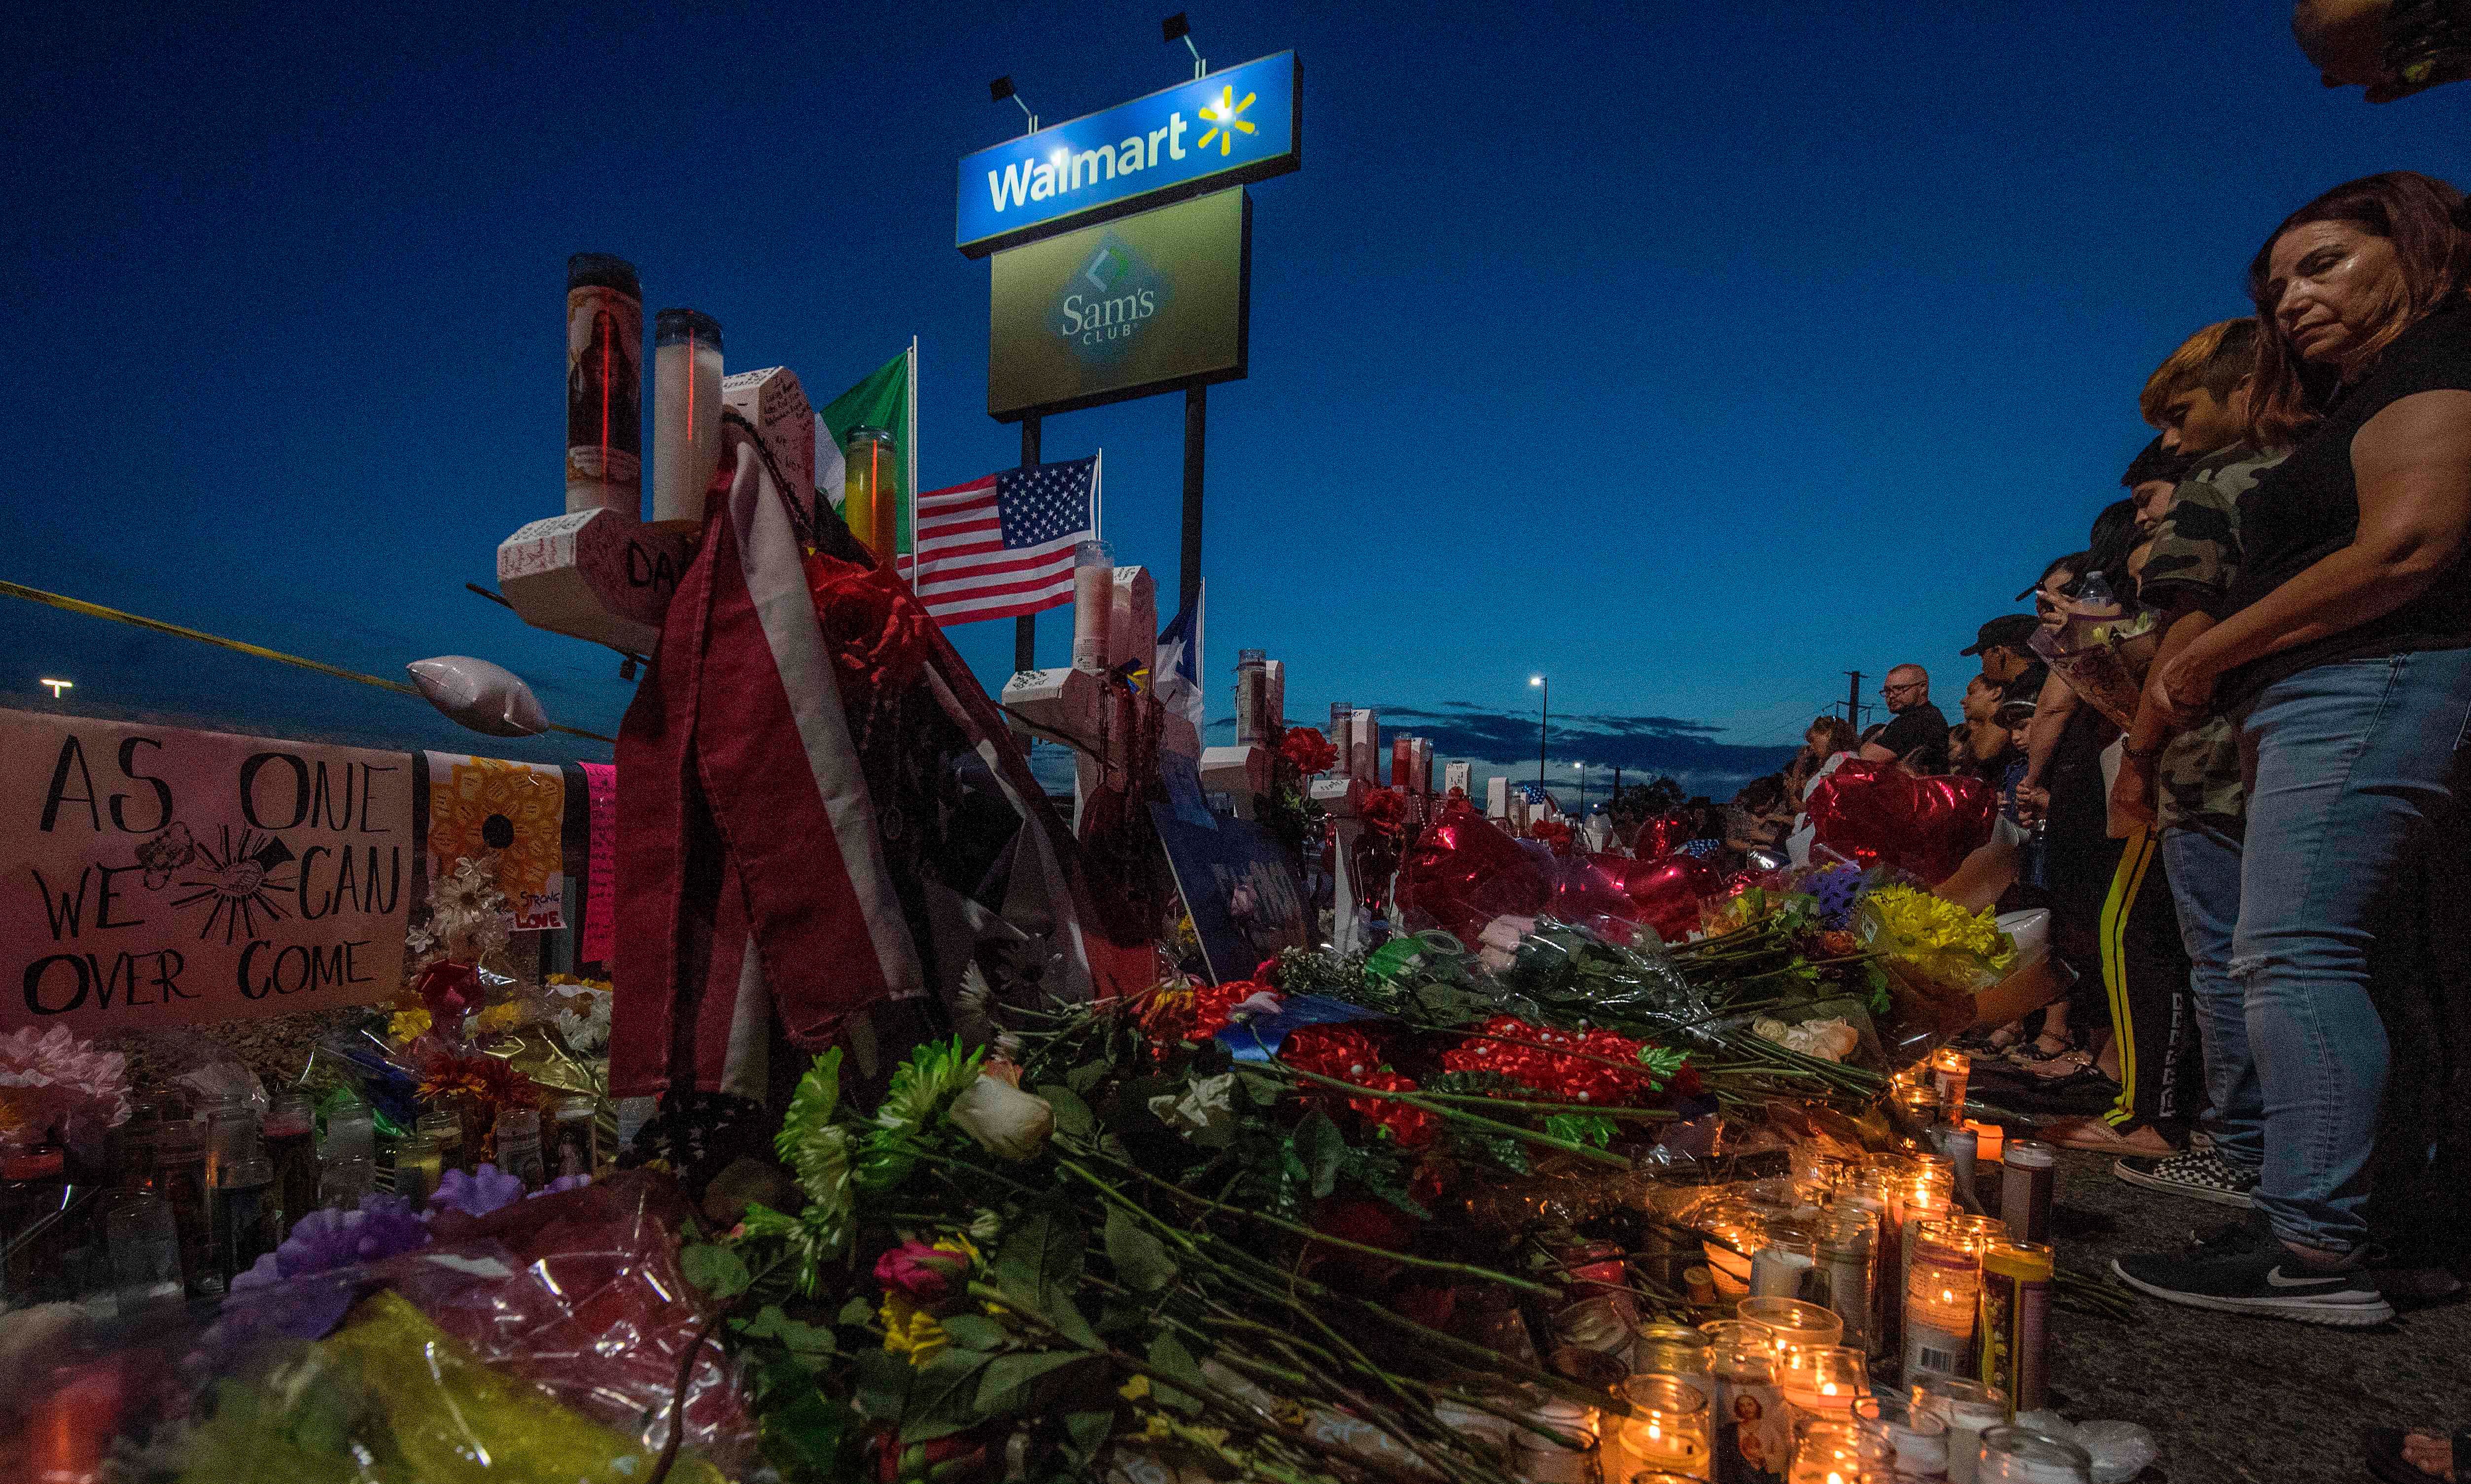 Walmart is taking displays of violent video games out of stores following El Paso shooting